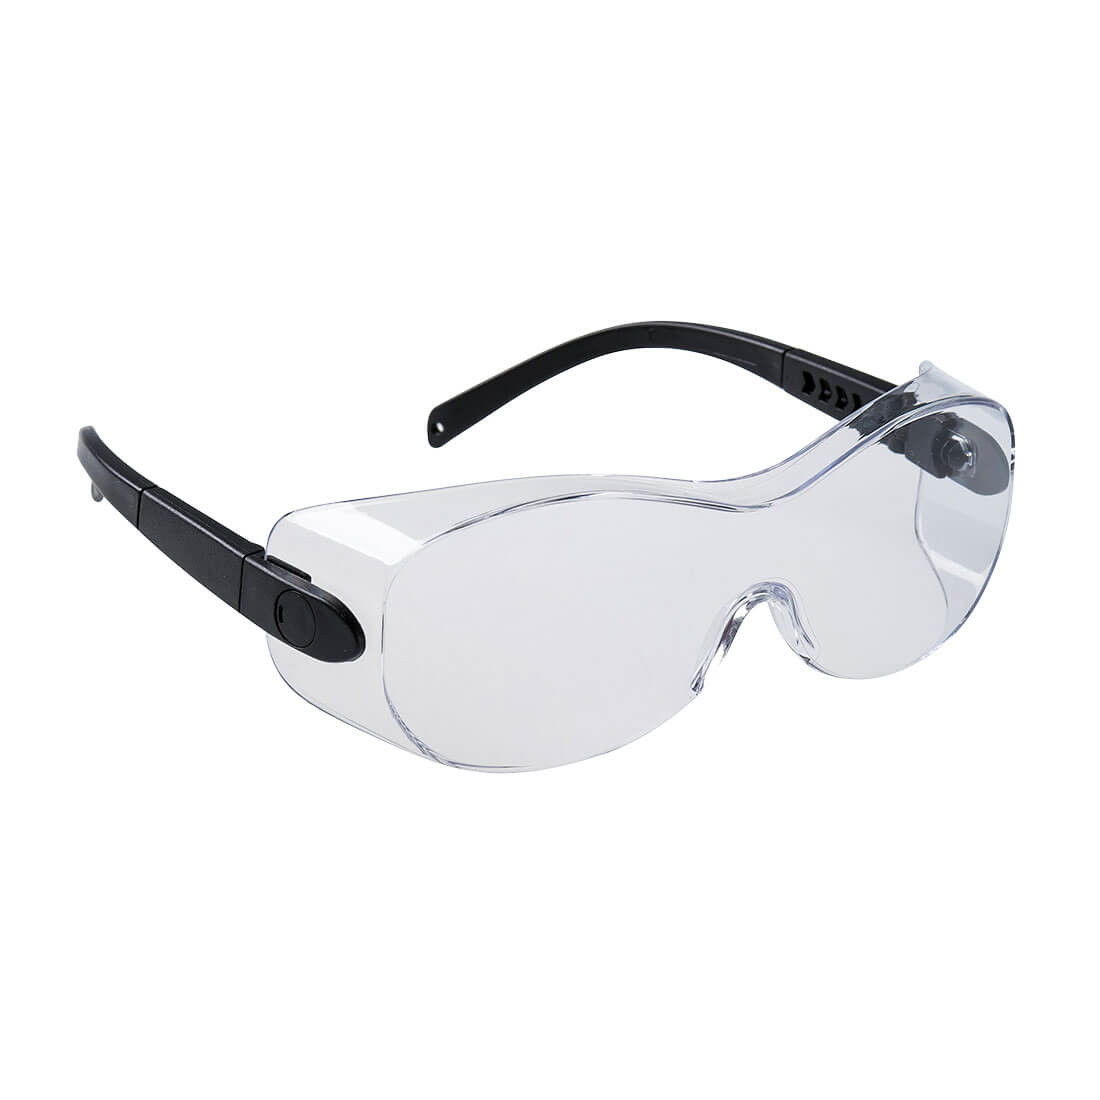 Image of Portwest Coverspecs Safety Glasses Black Clear